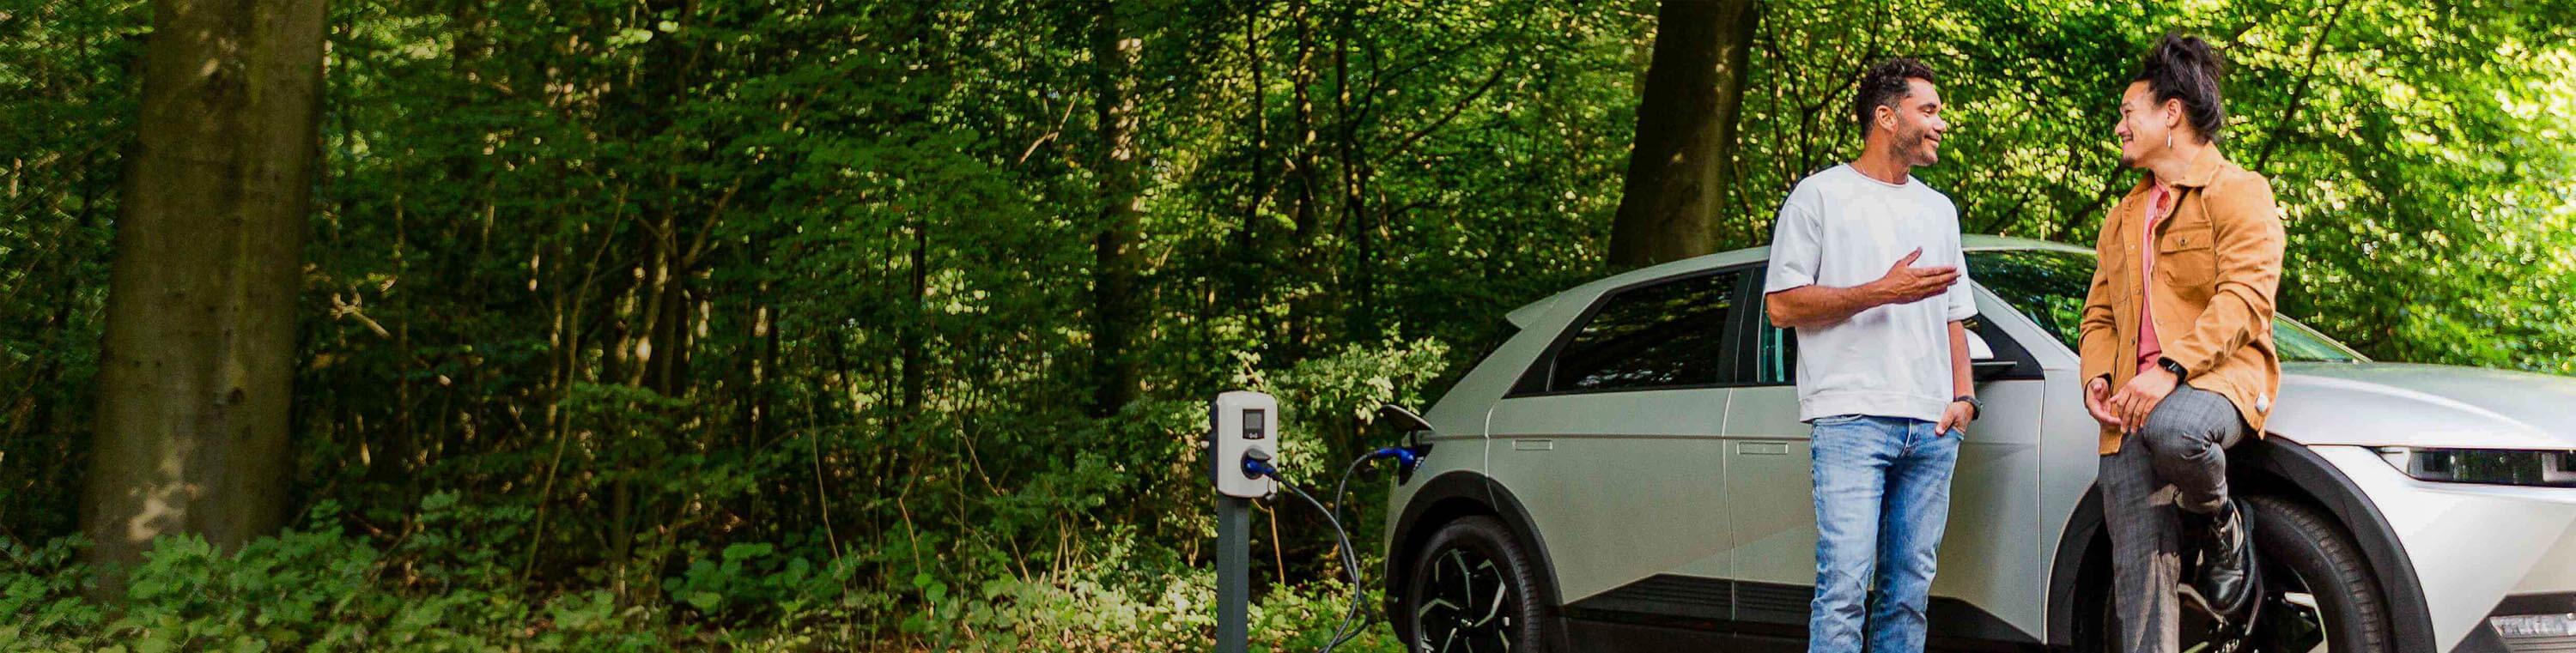 EV in forest charging - two people - hyundai ioniq (1)